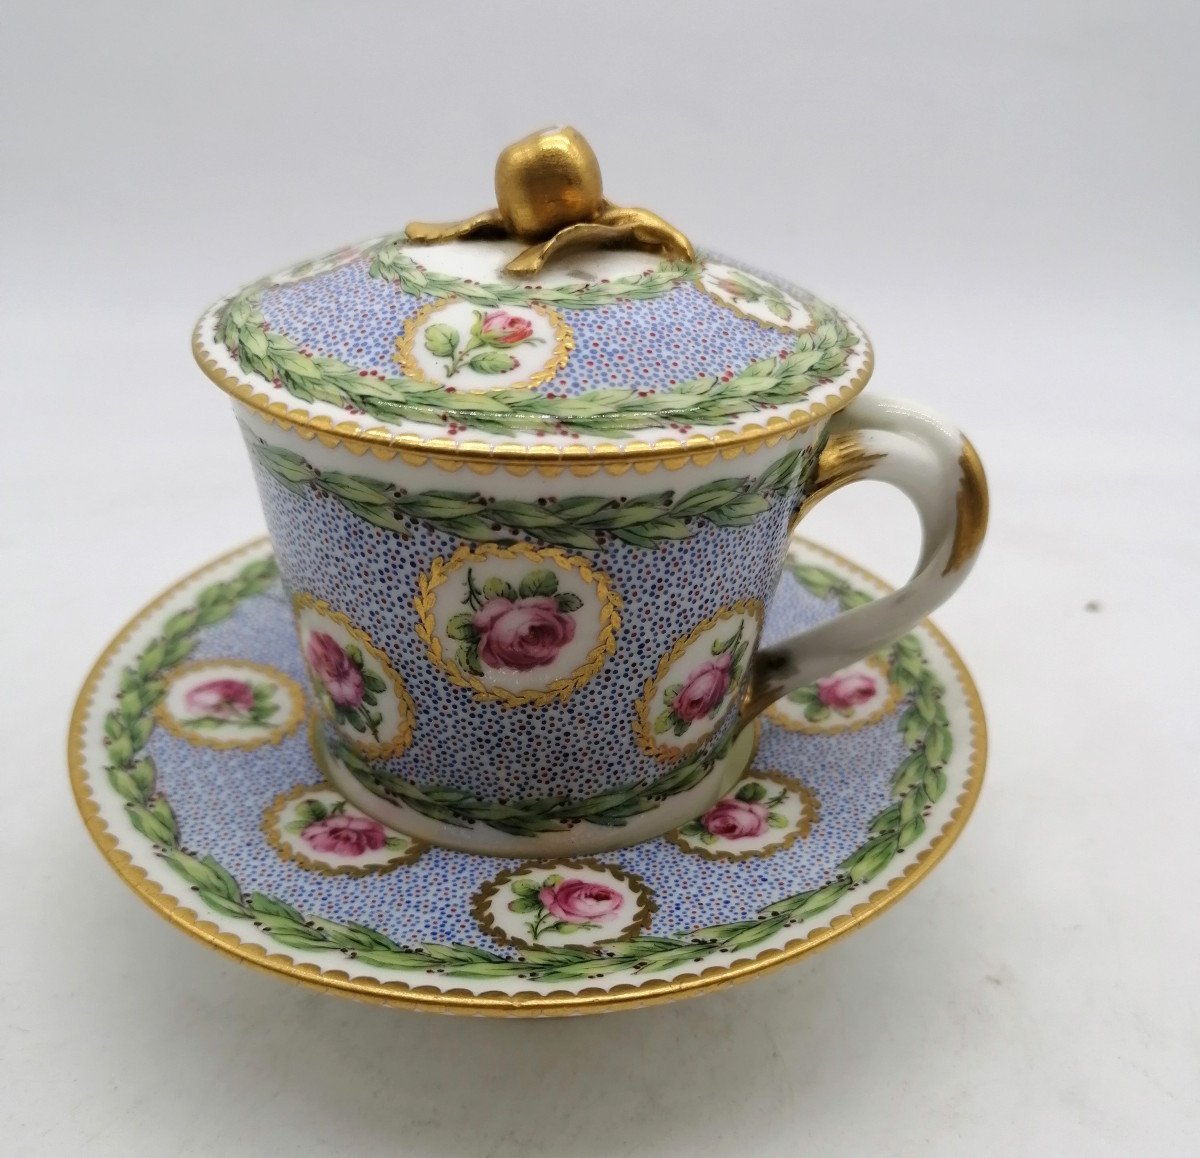 Porcelain Cup From Sèvres 18th Century